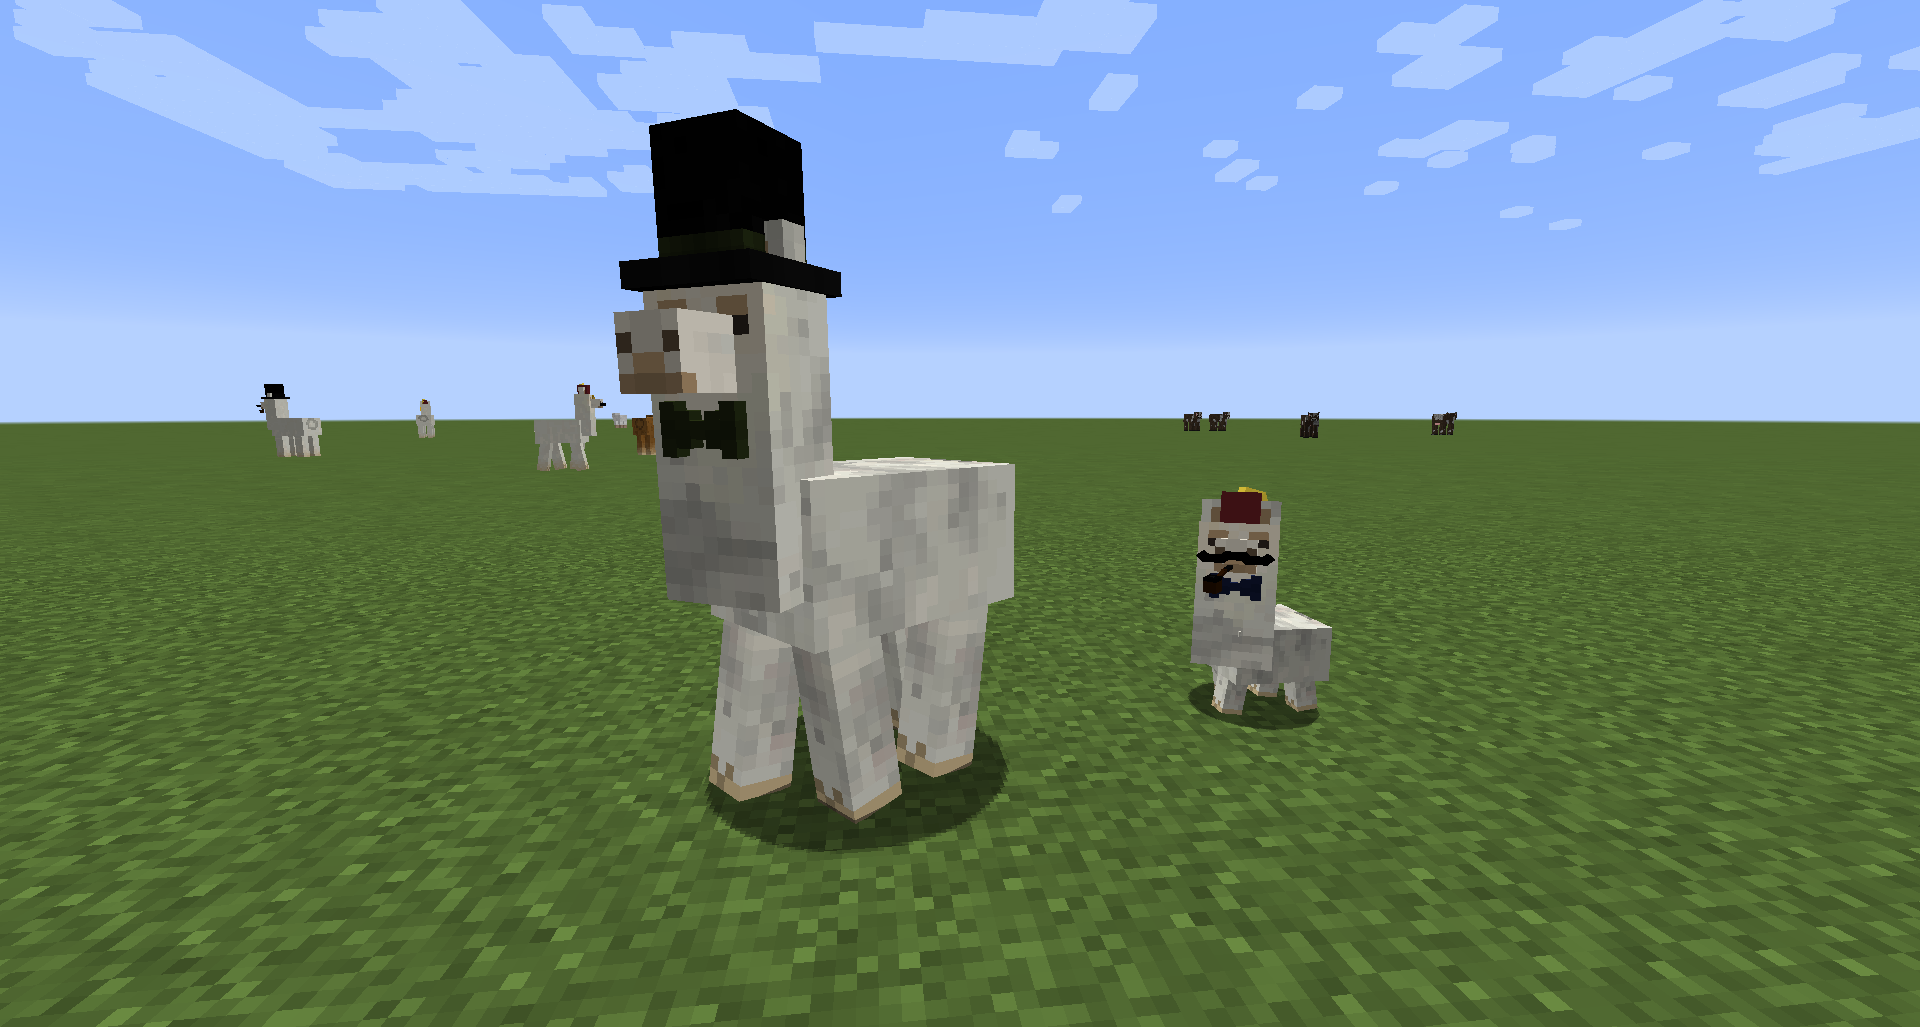 A cream colored llama with a green bow tie and top hat. A child llama is following closely behind it with a bow tie, pipe, curly moustache and a fez on the top of its head